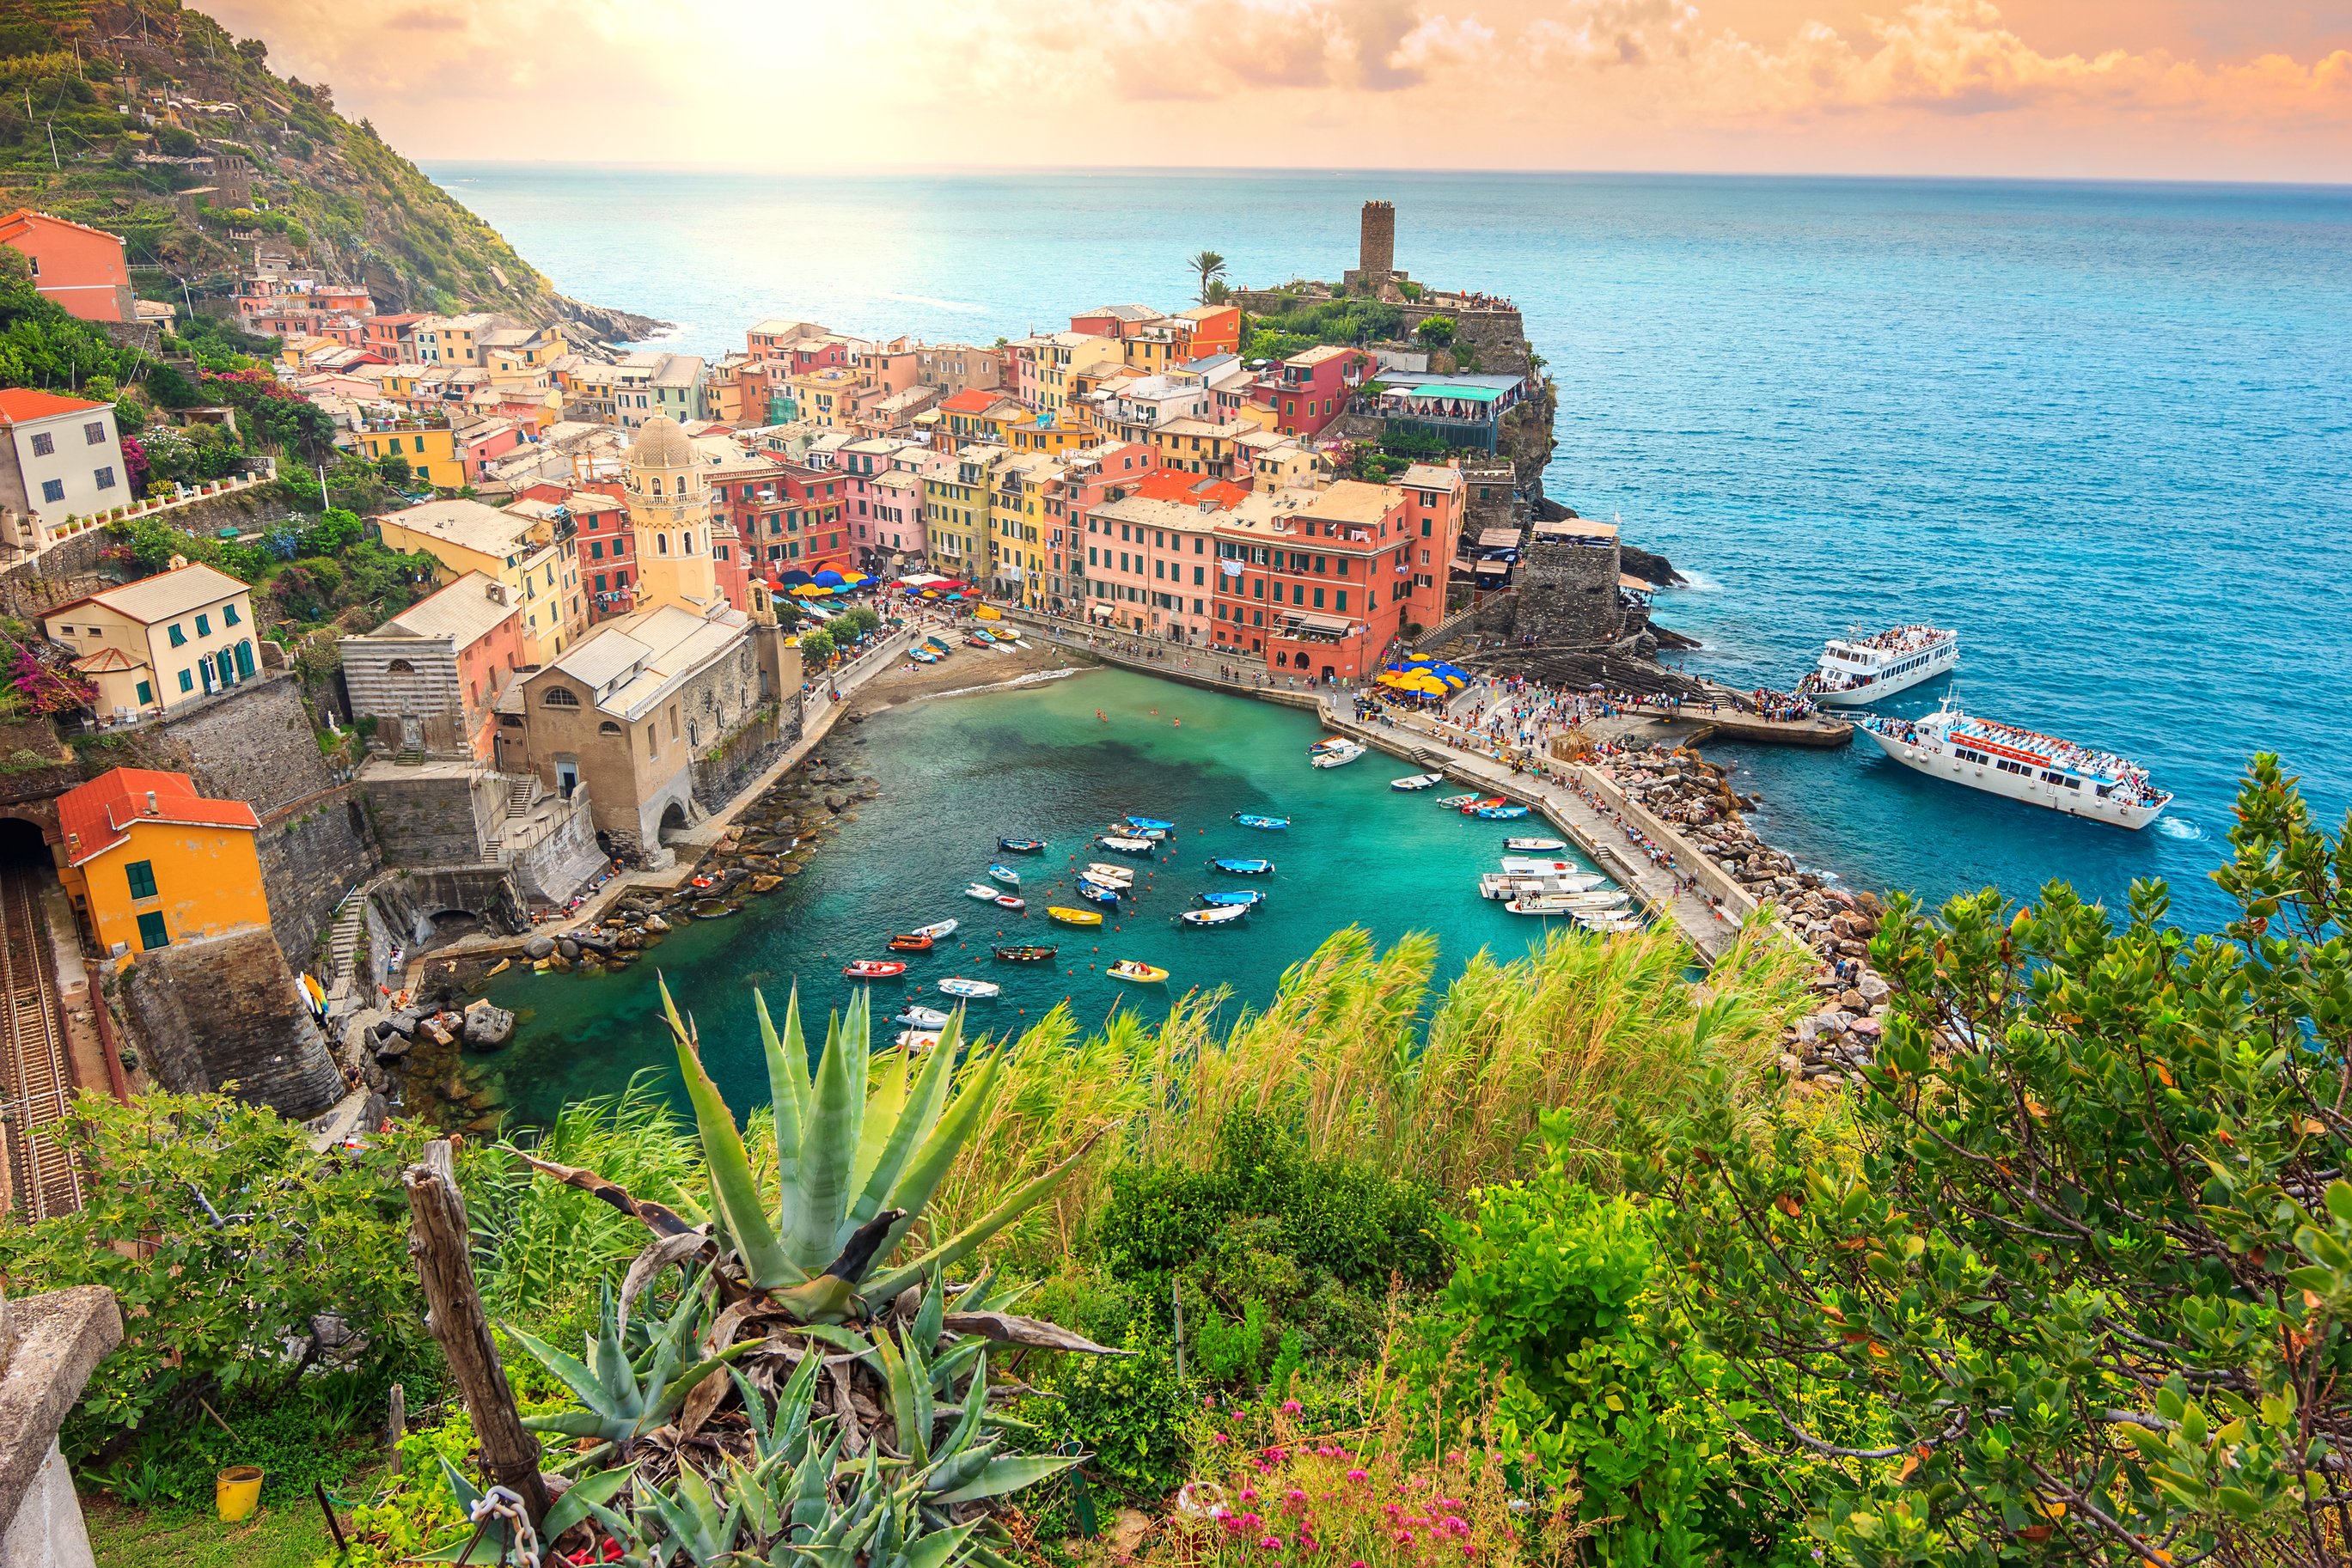 Nationwide flights to Europe in the $300s & $400s round-trip